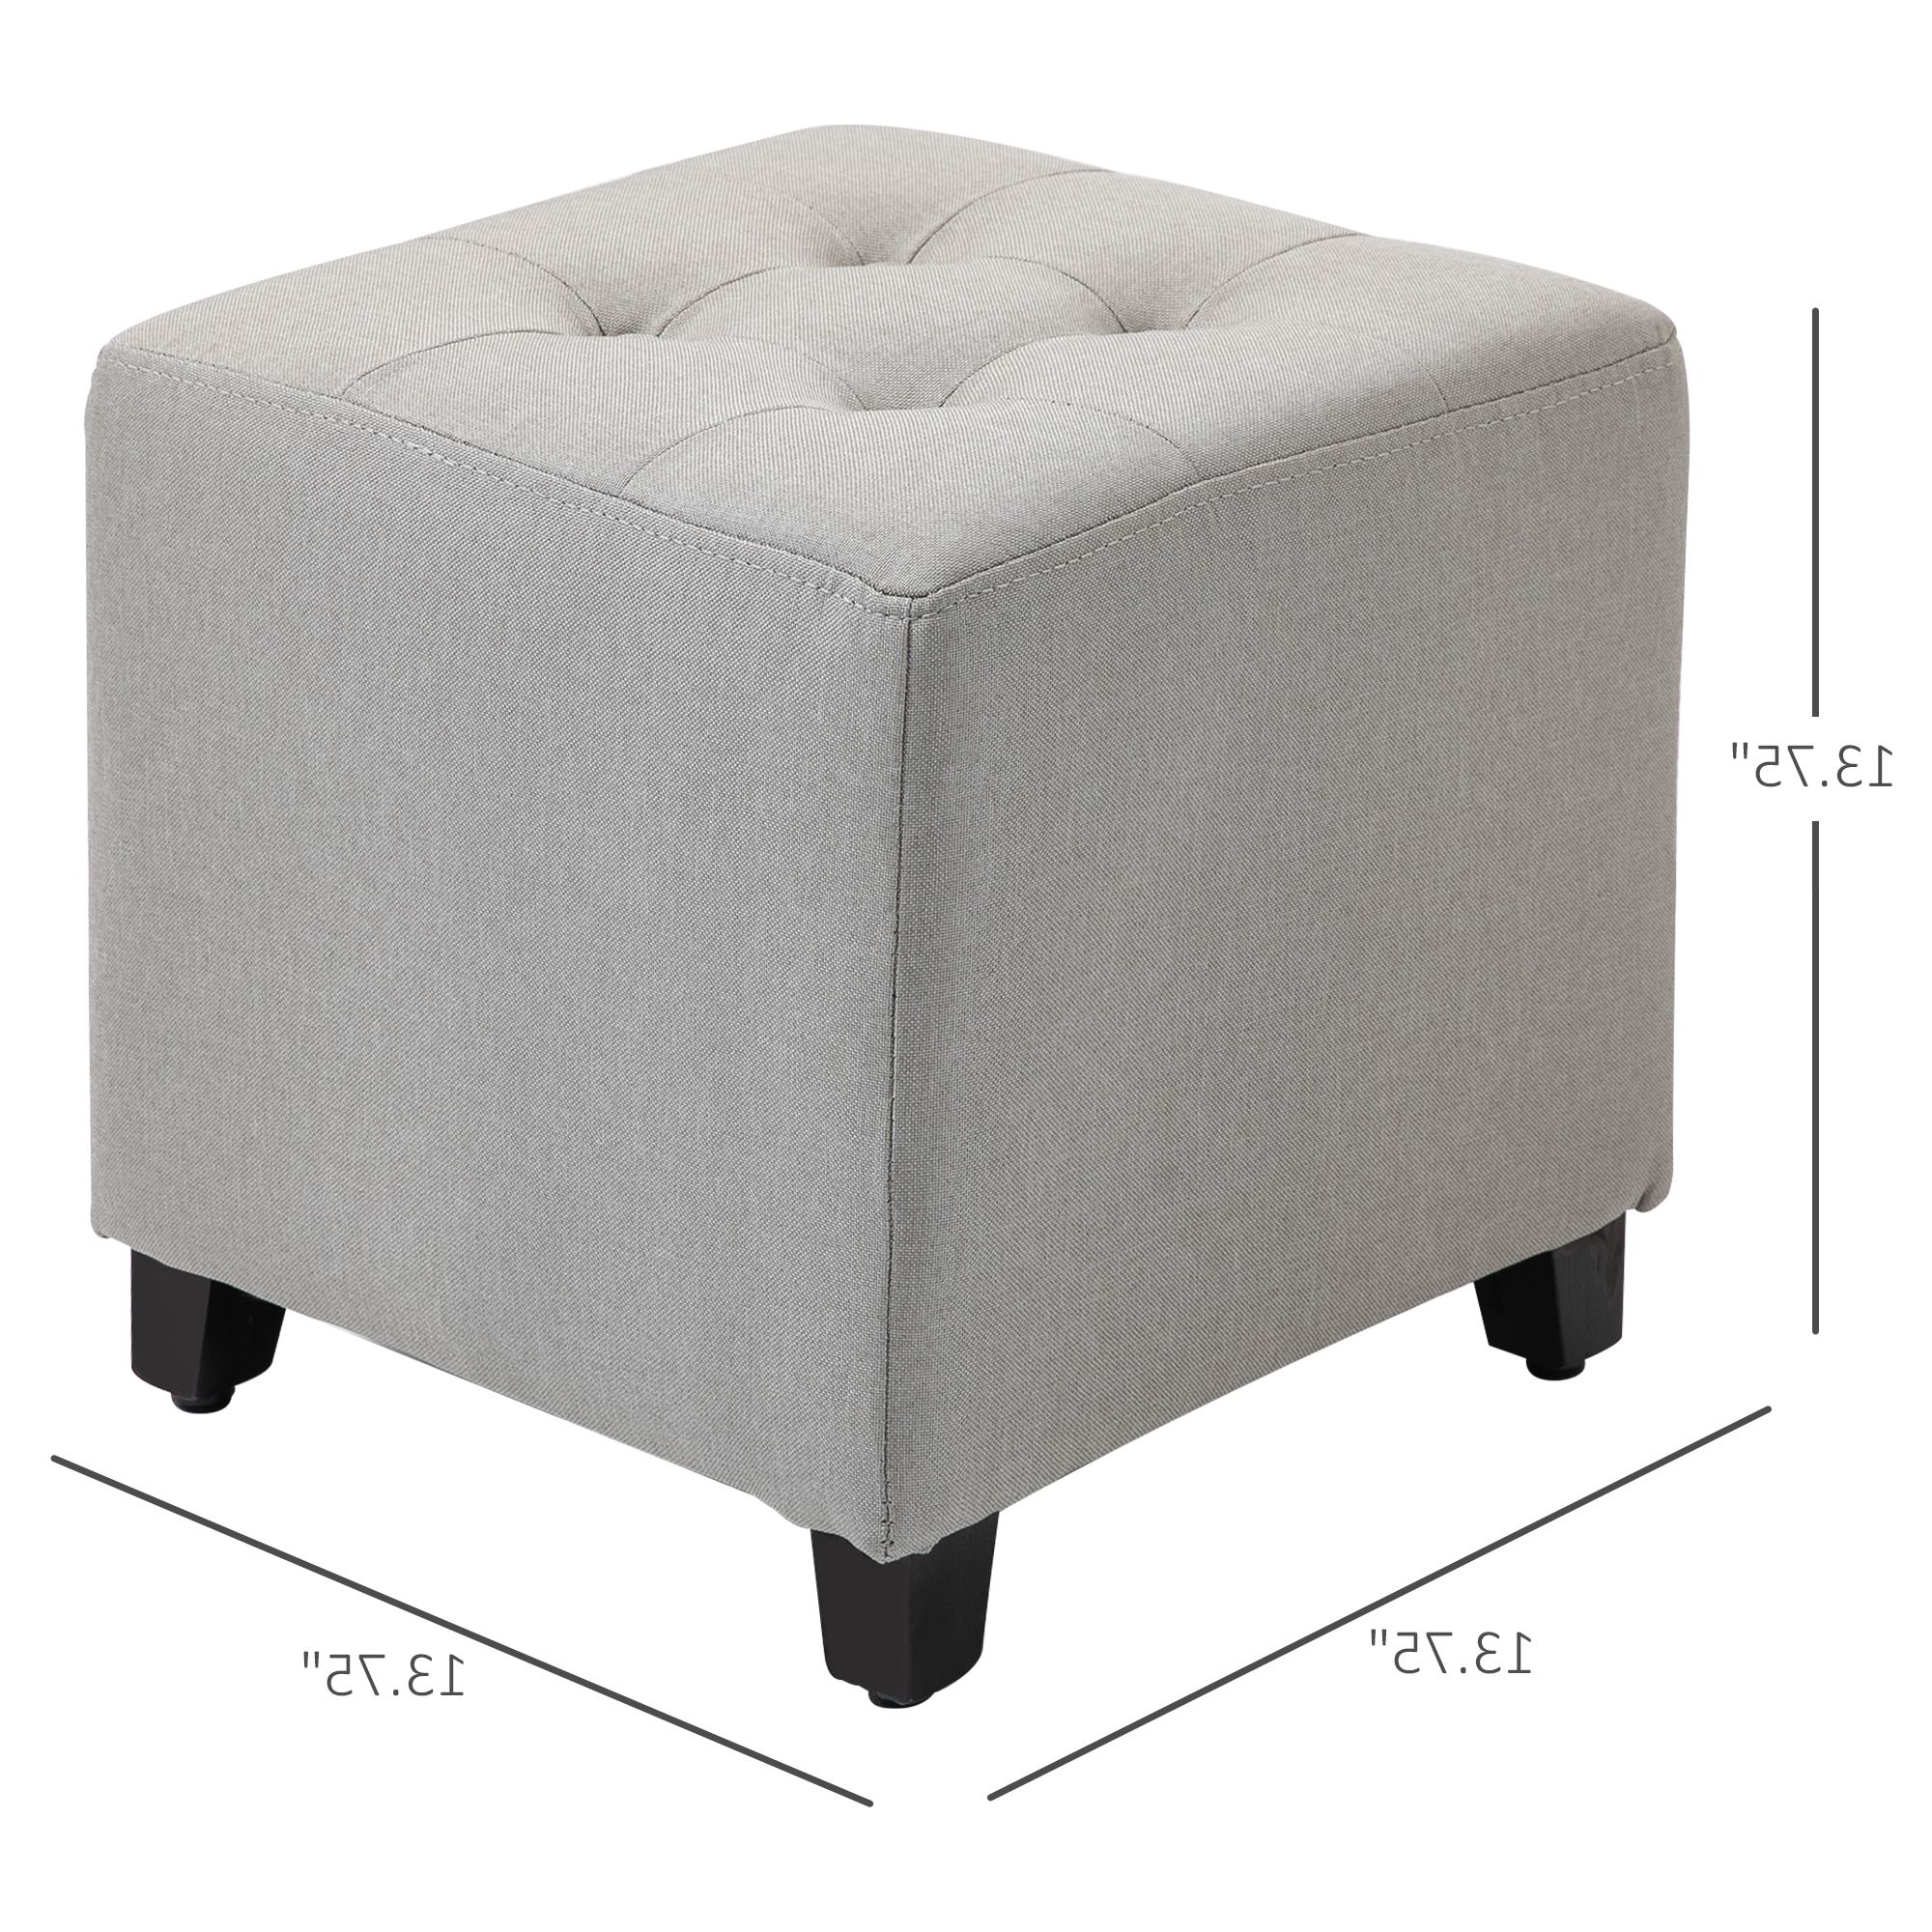 Tufted Ottoman Linen Touch Fabric Upholstered Footstool Footrest Coffee For Current Linen Fabric Tufted Surfboard Ottomans (View 8 of 10)